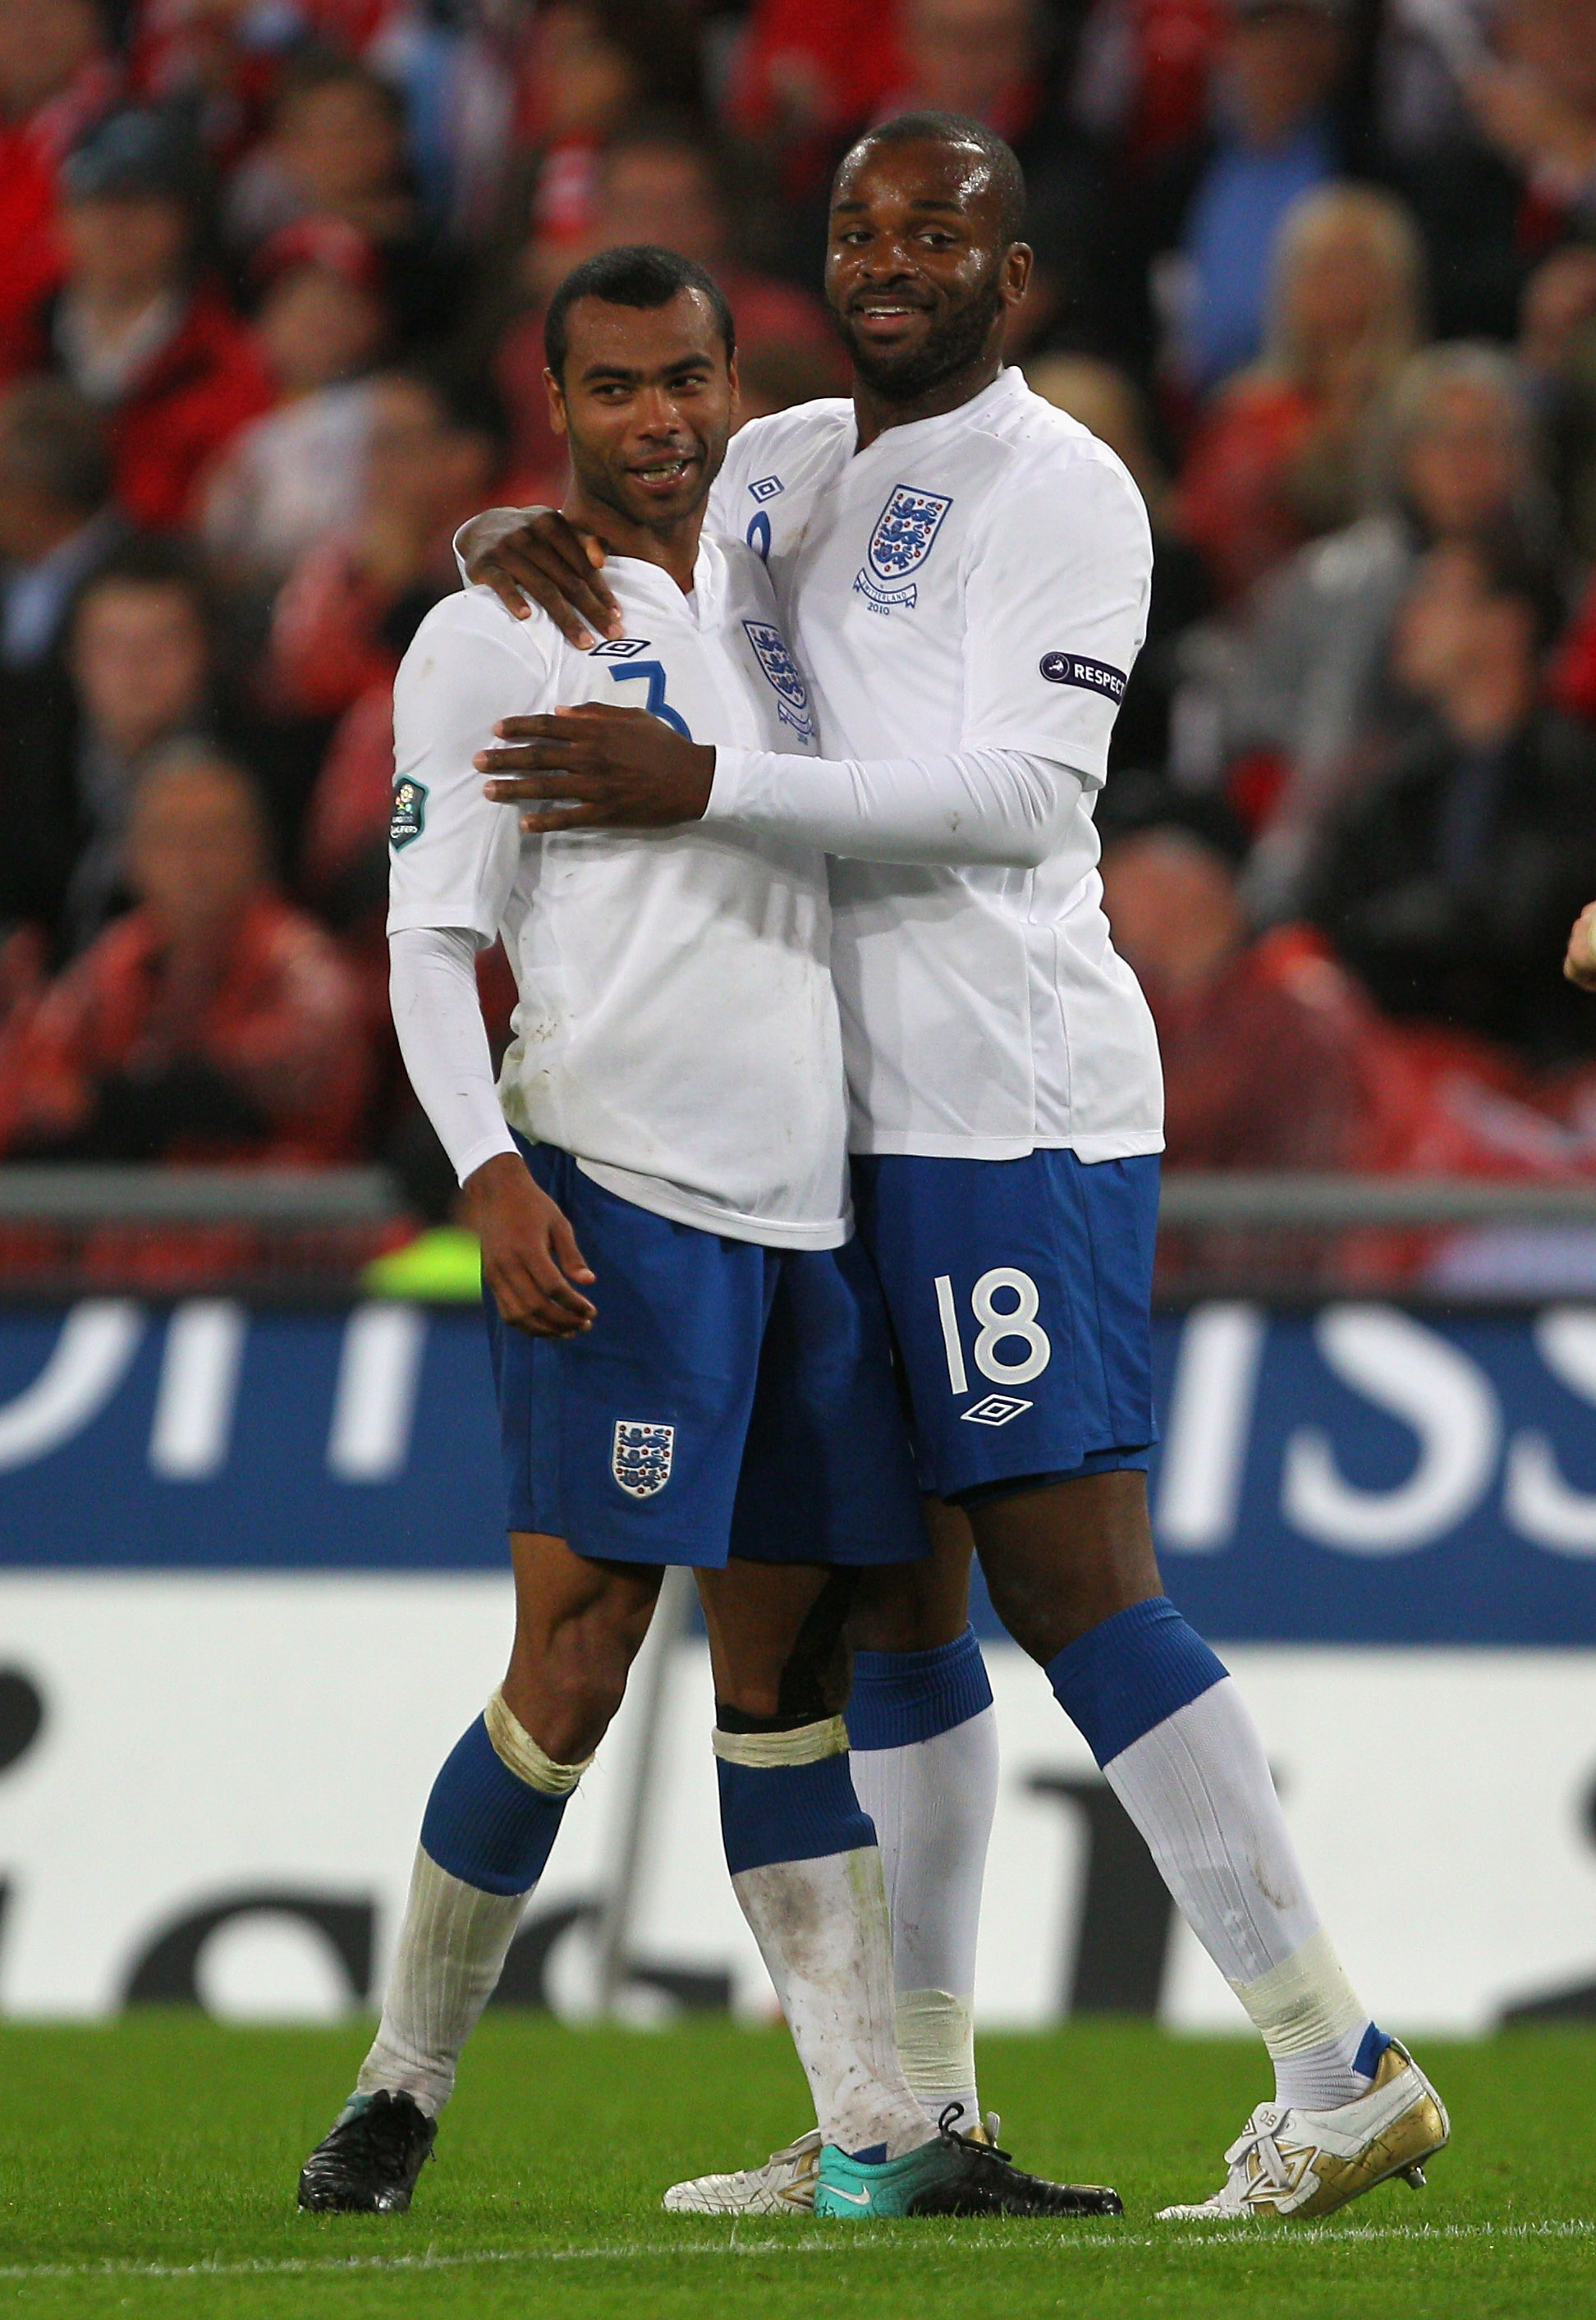 BASEL, SWITZERLAND - SEPTEMBER 07:  Darren Bent of England celebrates scoring his team's thrid goal with Ashley Cole during the EURO 2012 Group G Qualifier between Switzerland and England at St Jakob Park on September 7, 2010 in Basel, Switzerland.  (Phot